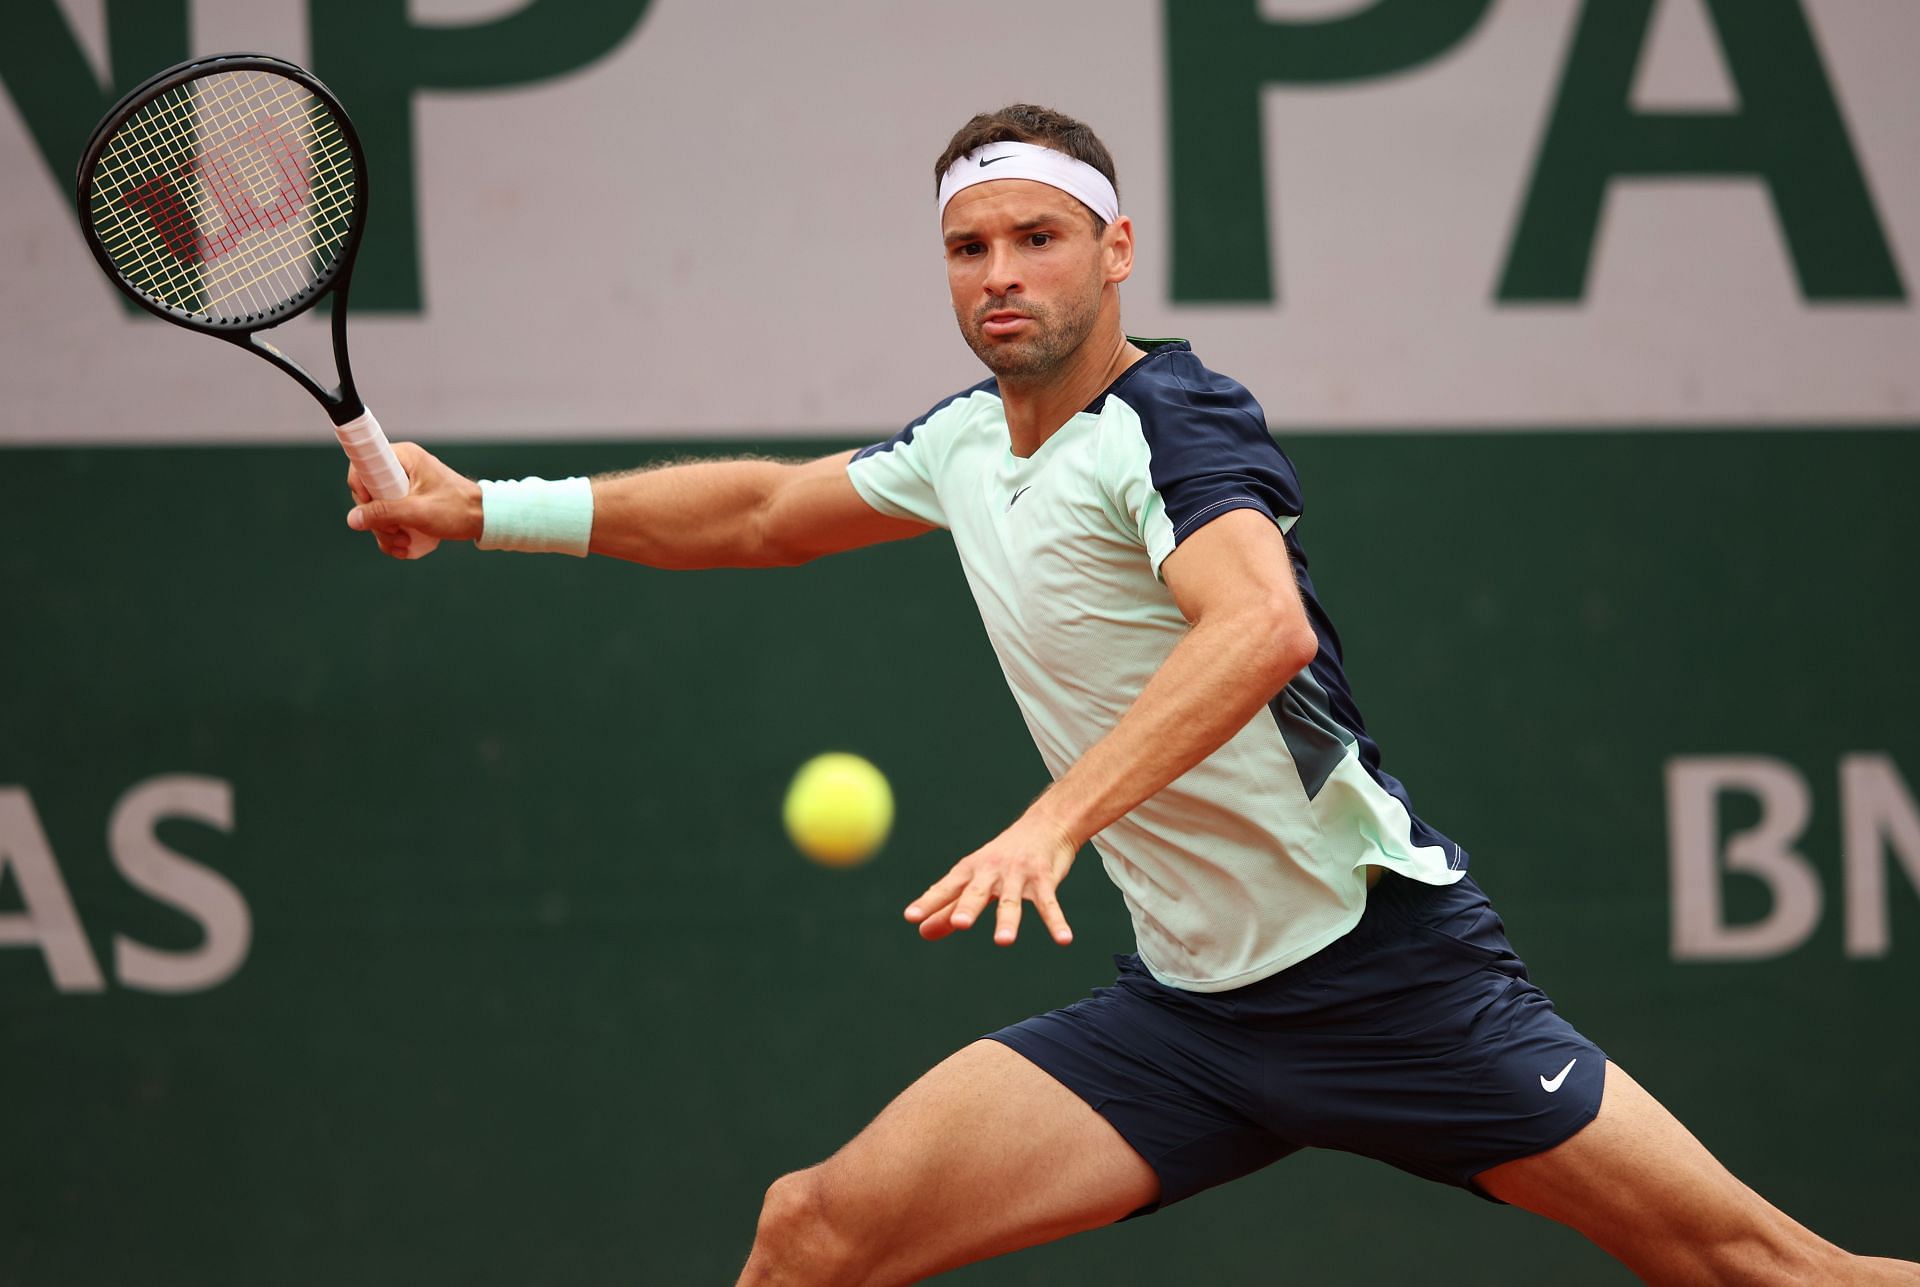 Grigor Dimitrov at the 2022 French Open